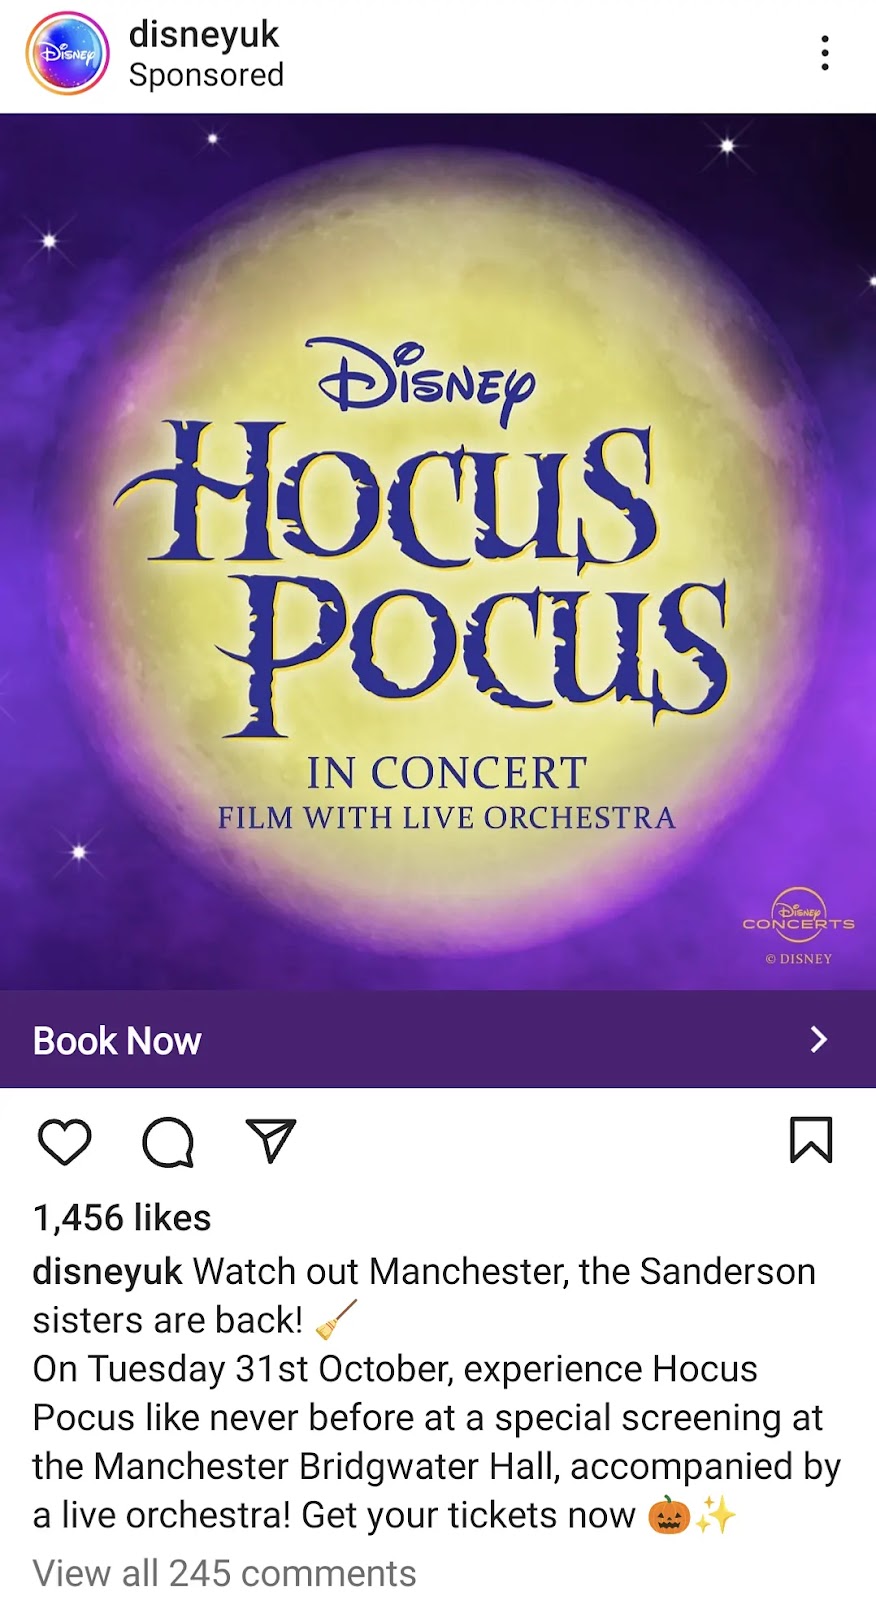 Disney's Instagram ad for a show in Manchester, UK